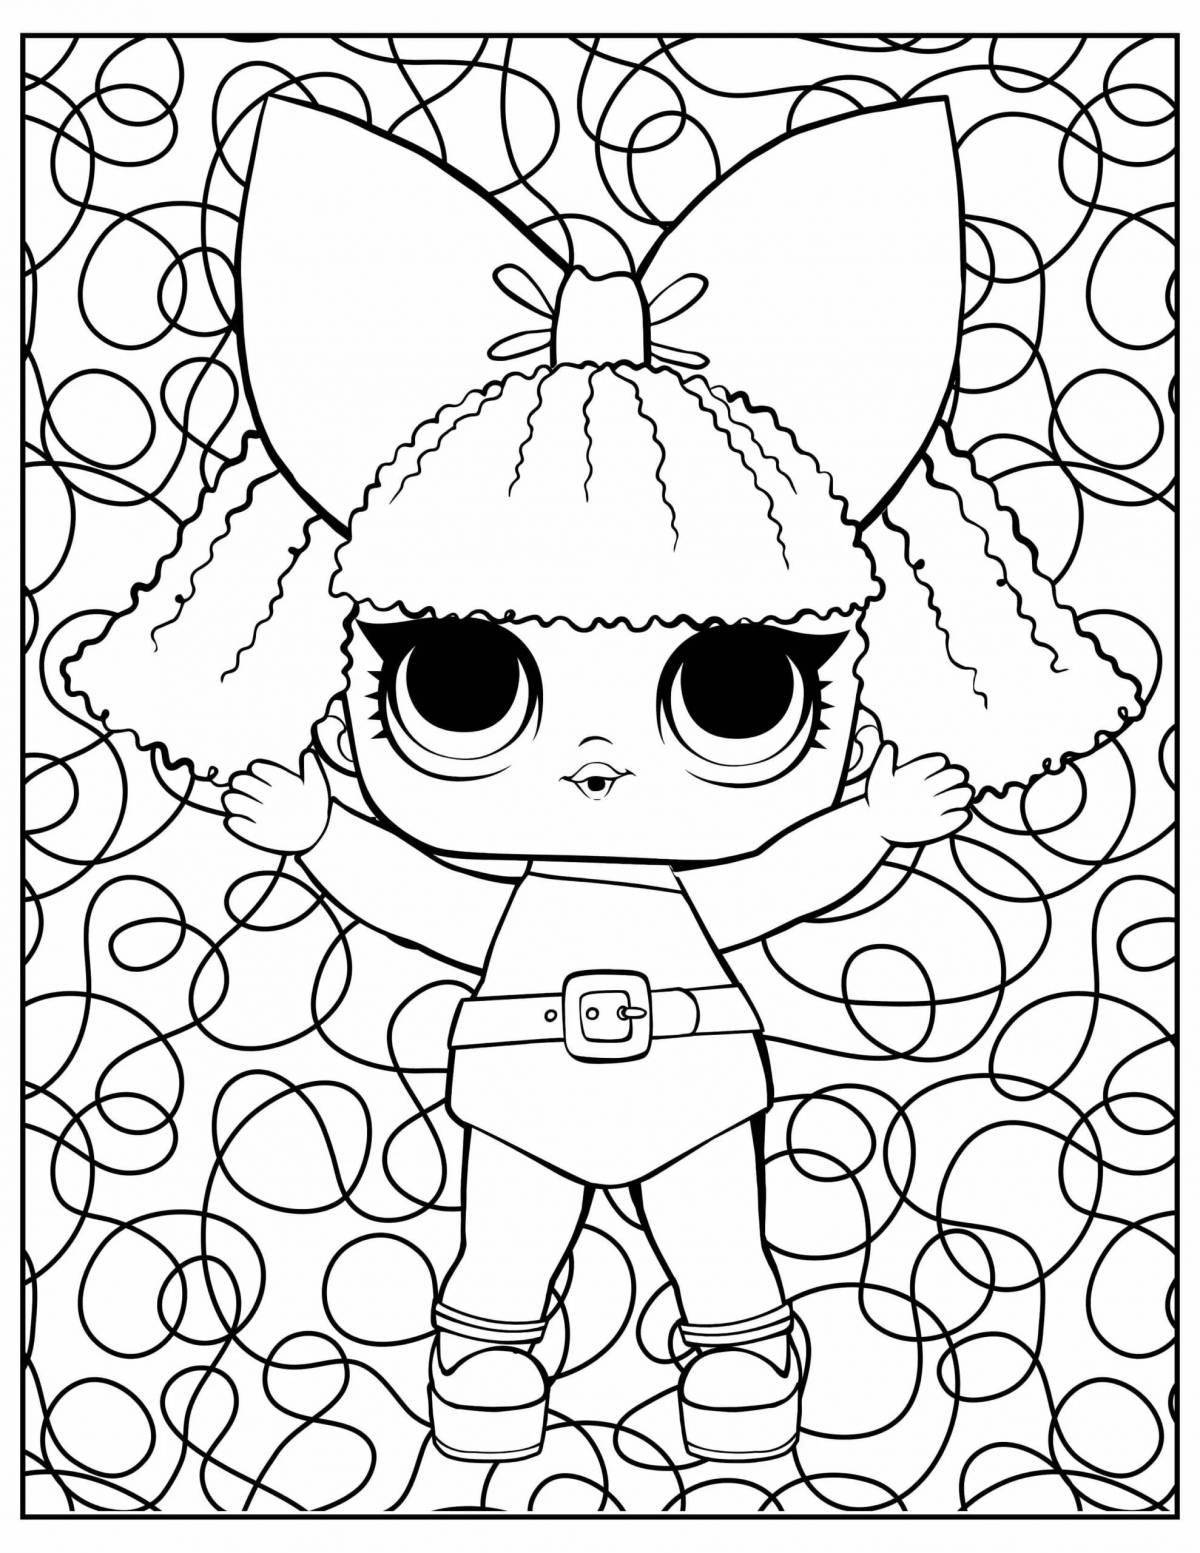 Colorful lol doll coloring by numbers